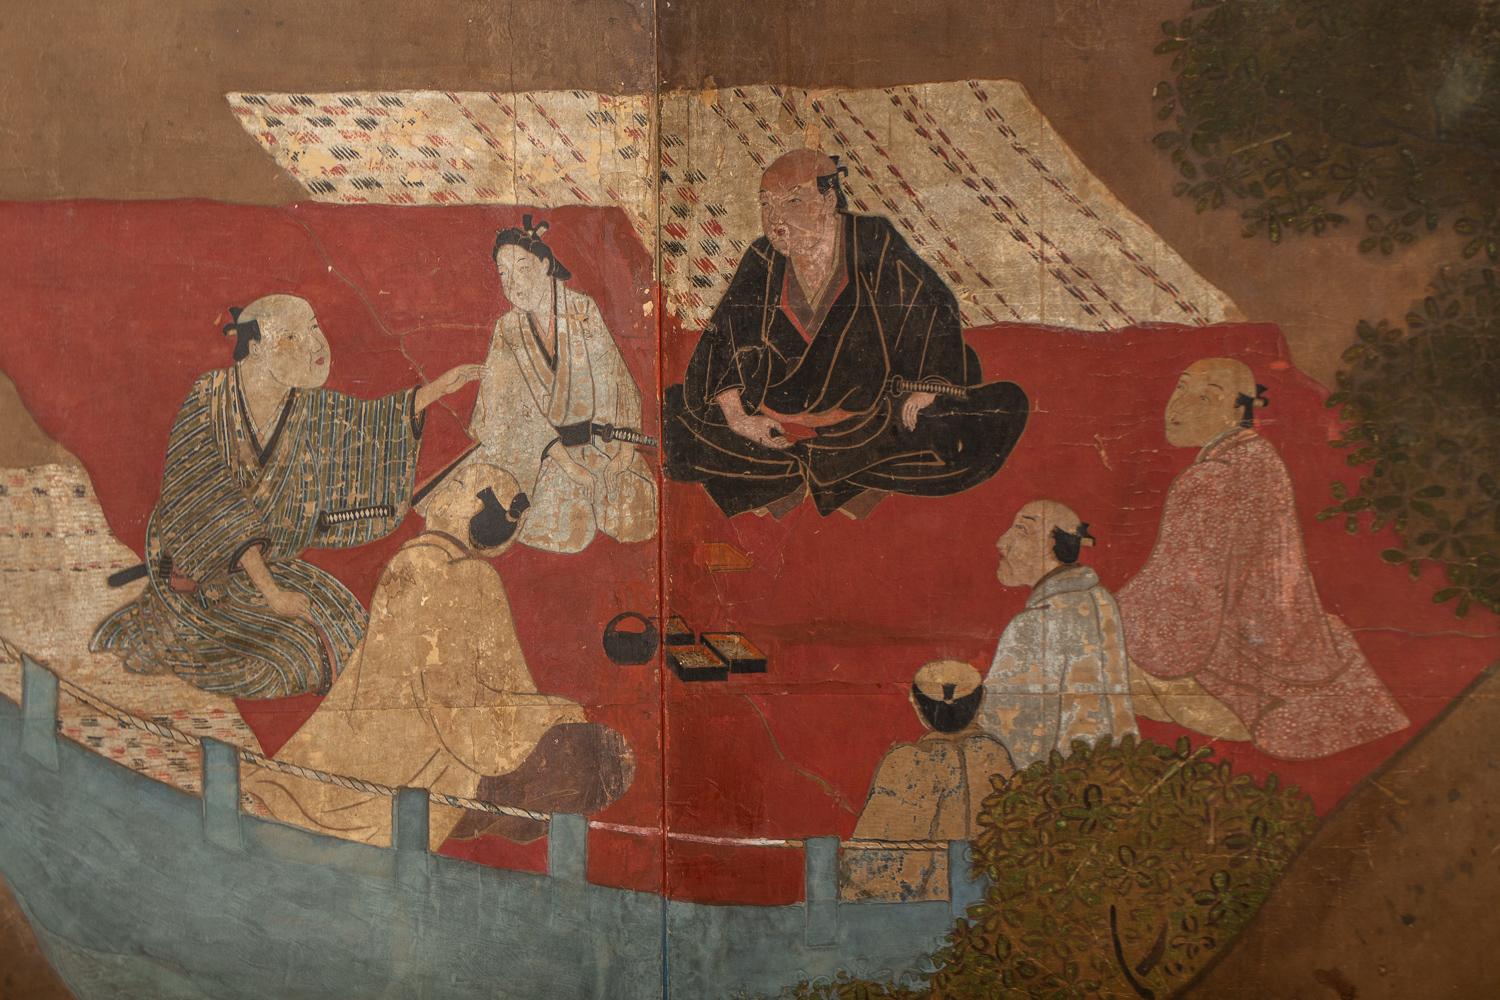 A private viewing in picnic surrounding of nobles (probably samurai), including one woman. Mineral pigments on mulberry paper with silk brocade border.